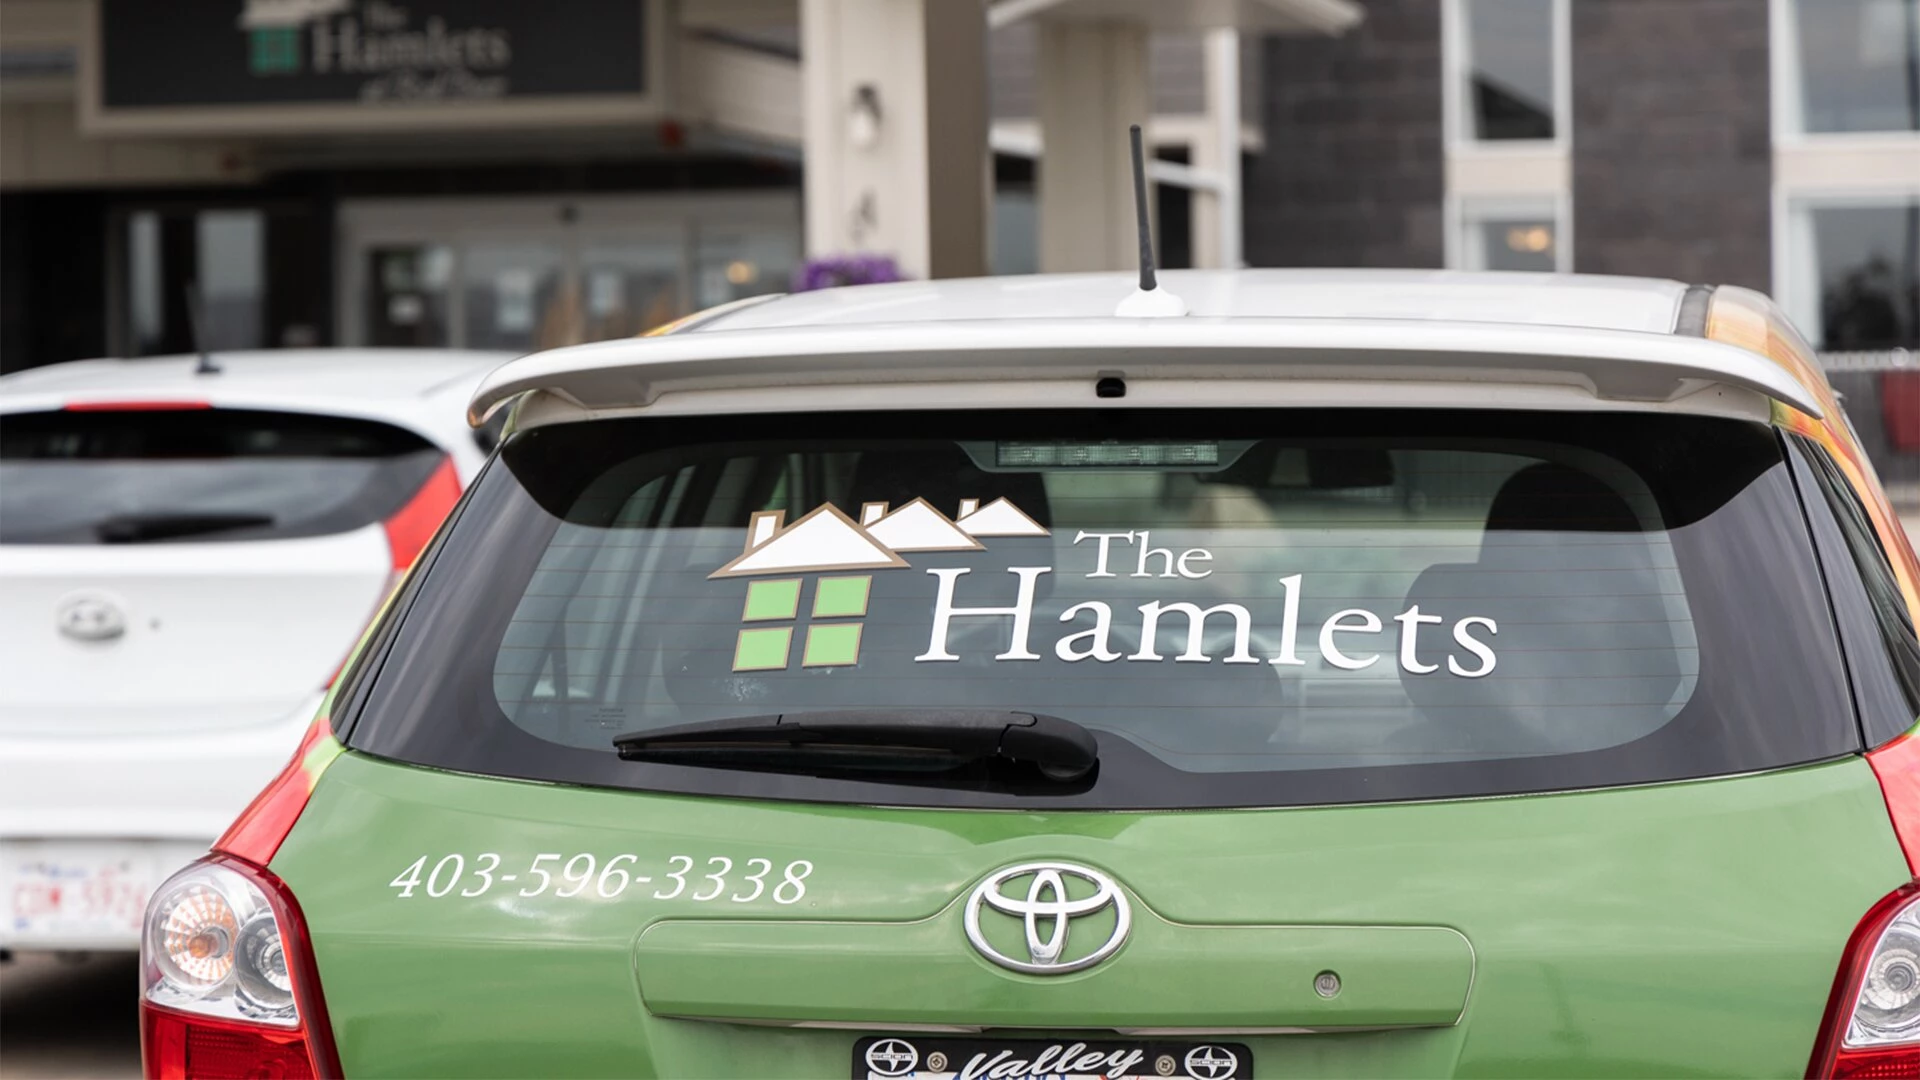 A green hatchback car with The Hamlets of Red Deer name and number